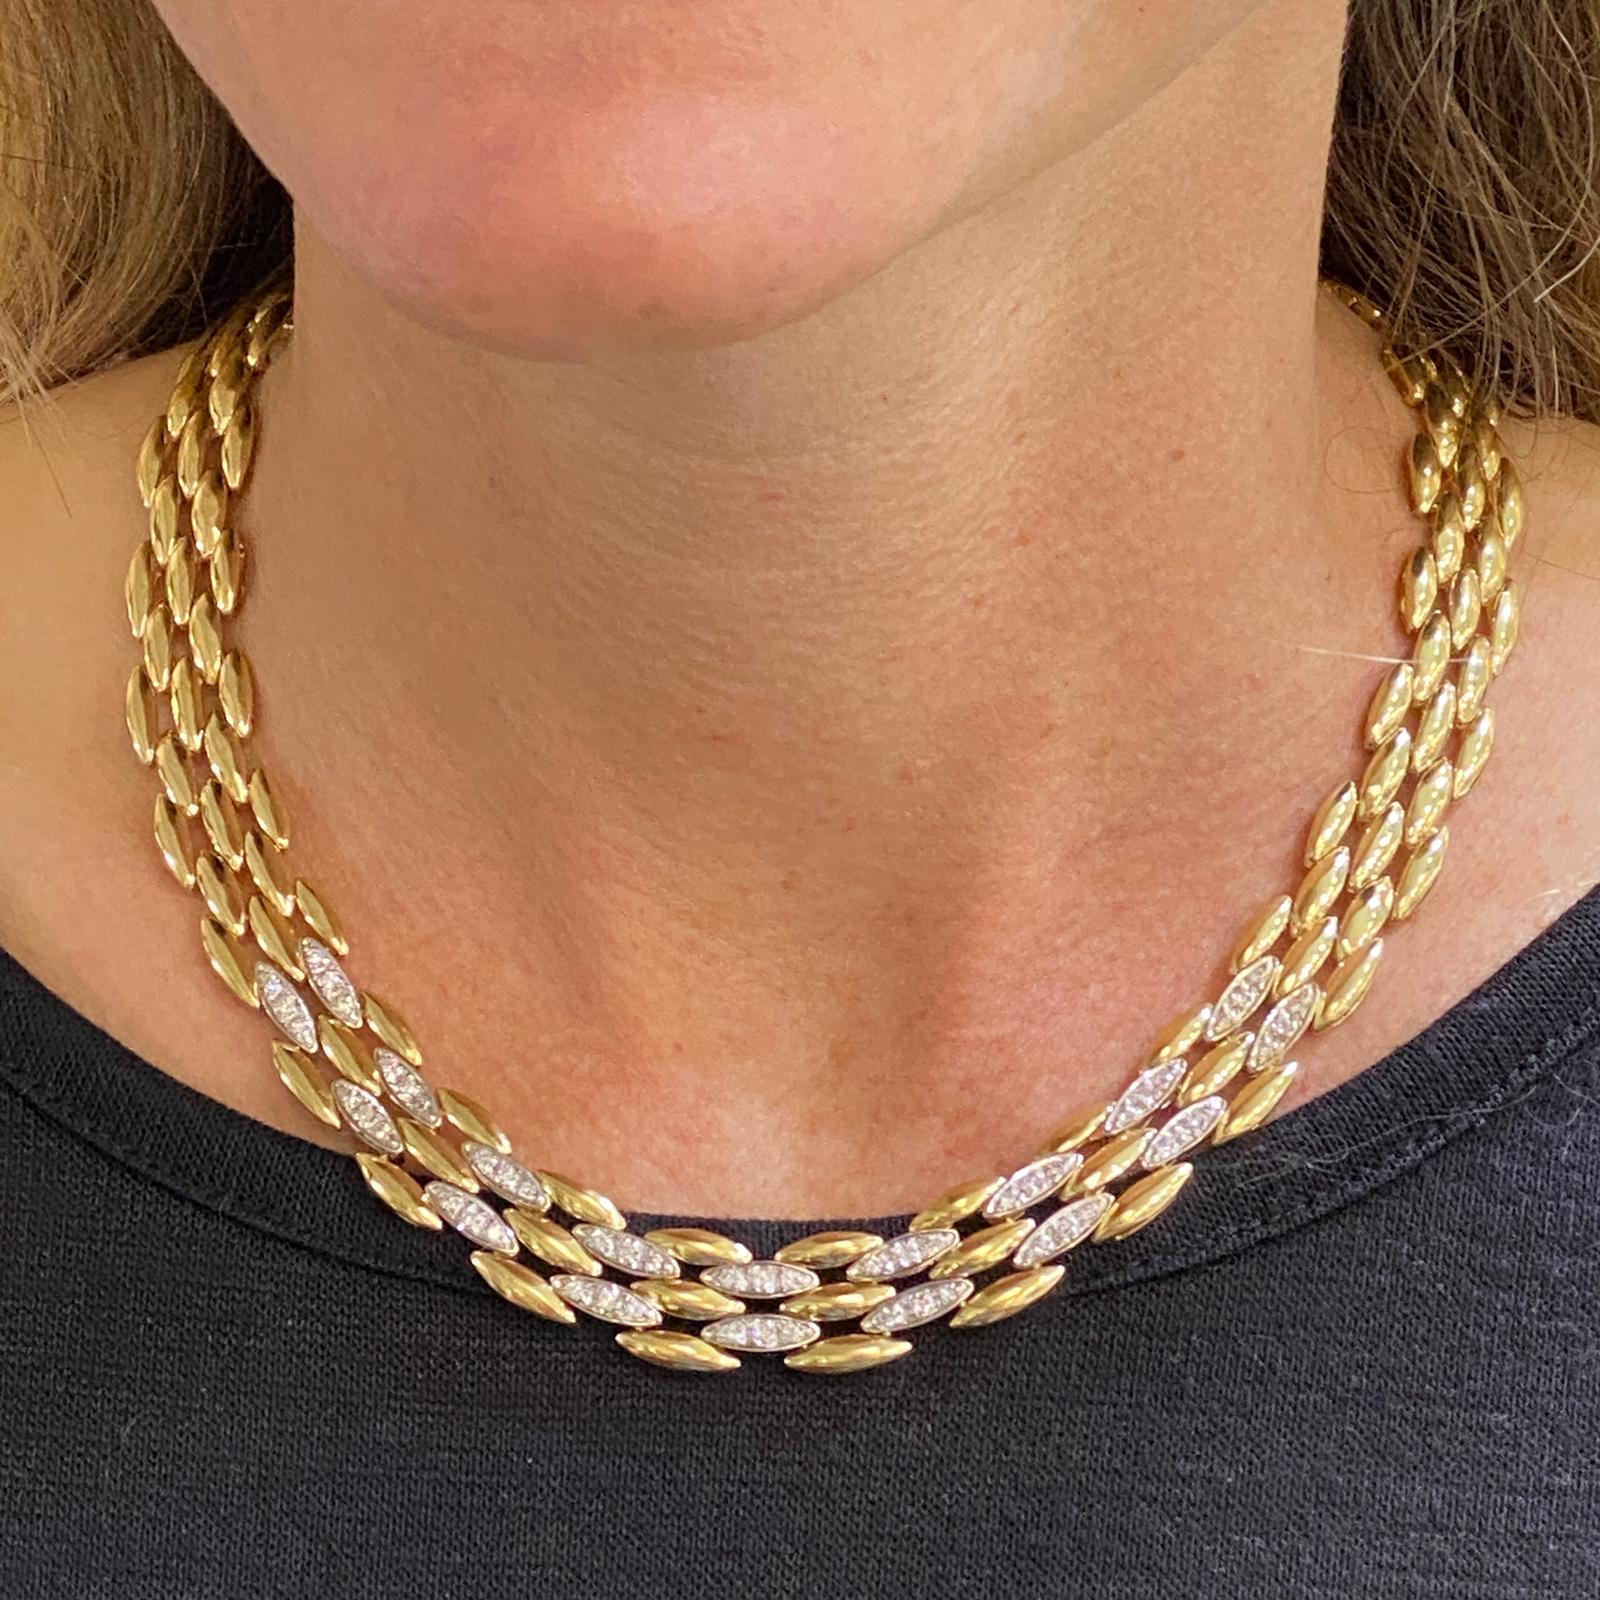 Diamond panther link necklace crafted in 14 karat yellow gold. The necklace features 54 round brilliant cut diamonds weighing approximately 1.00 carat total weight and graded H-I color and SI clarity. The five rows measure .50 inch in width, and the